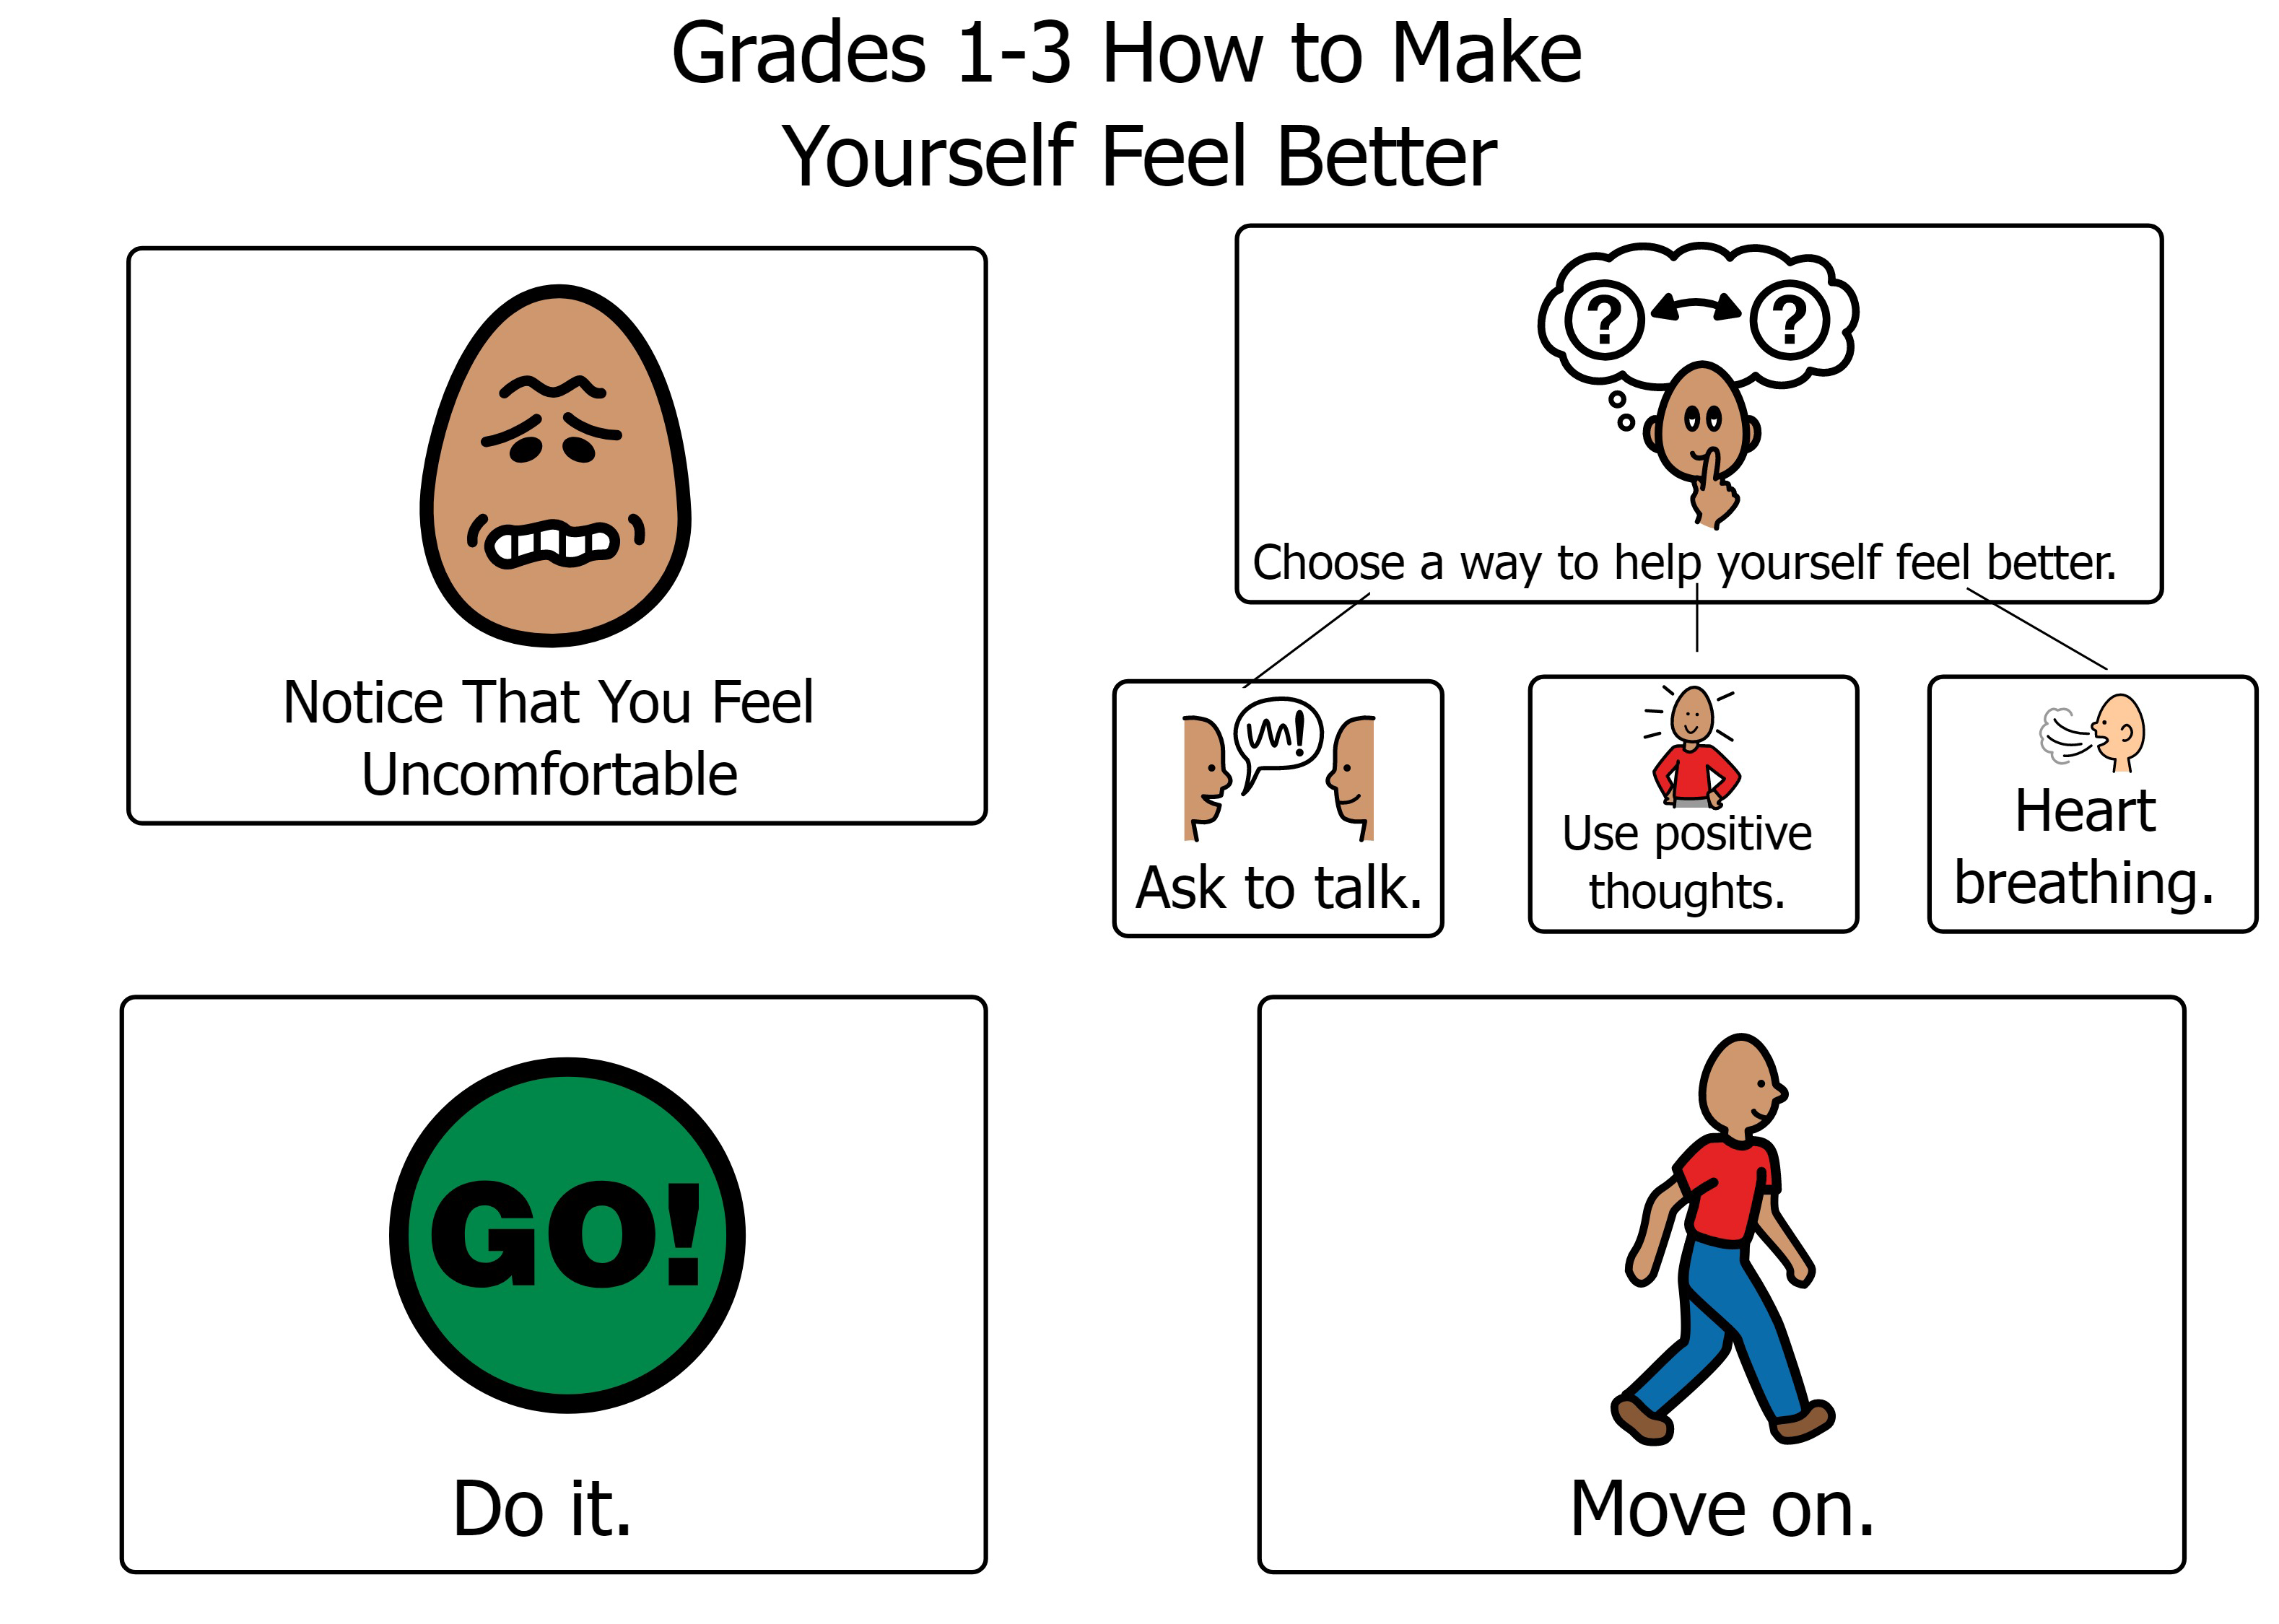 Grades 1-3 How to Make Yourself Feel Better Poster